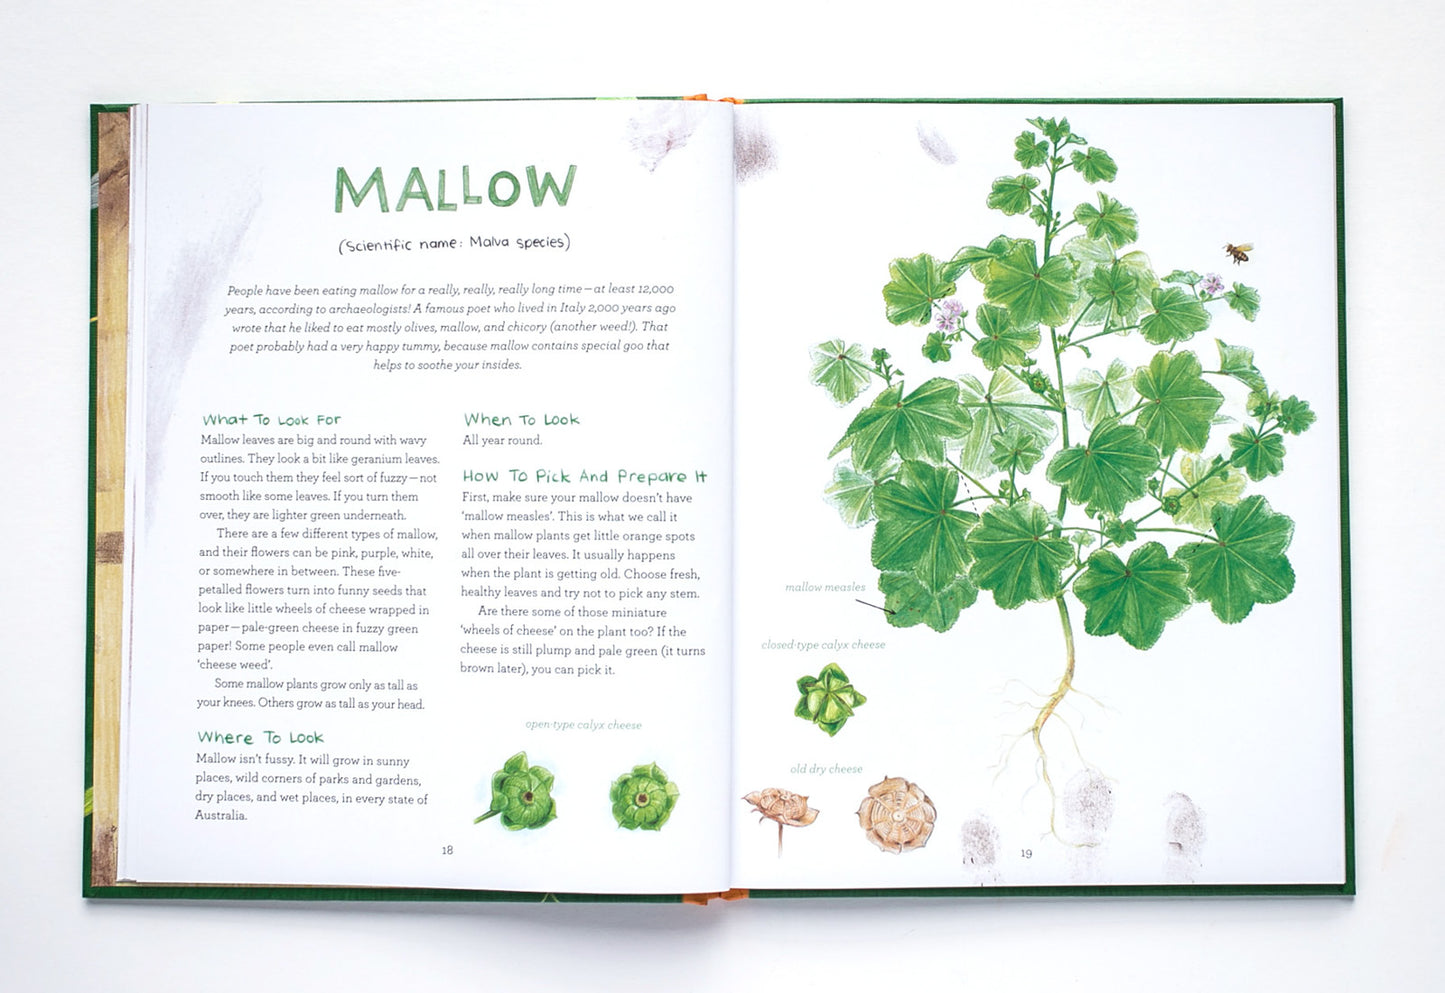 Let's Eat Weeds!: a kids' guide to foraging